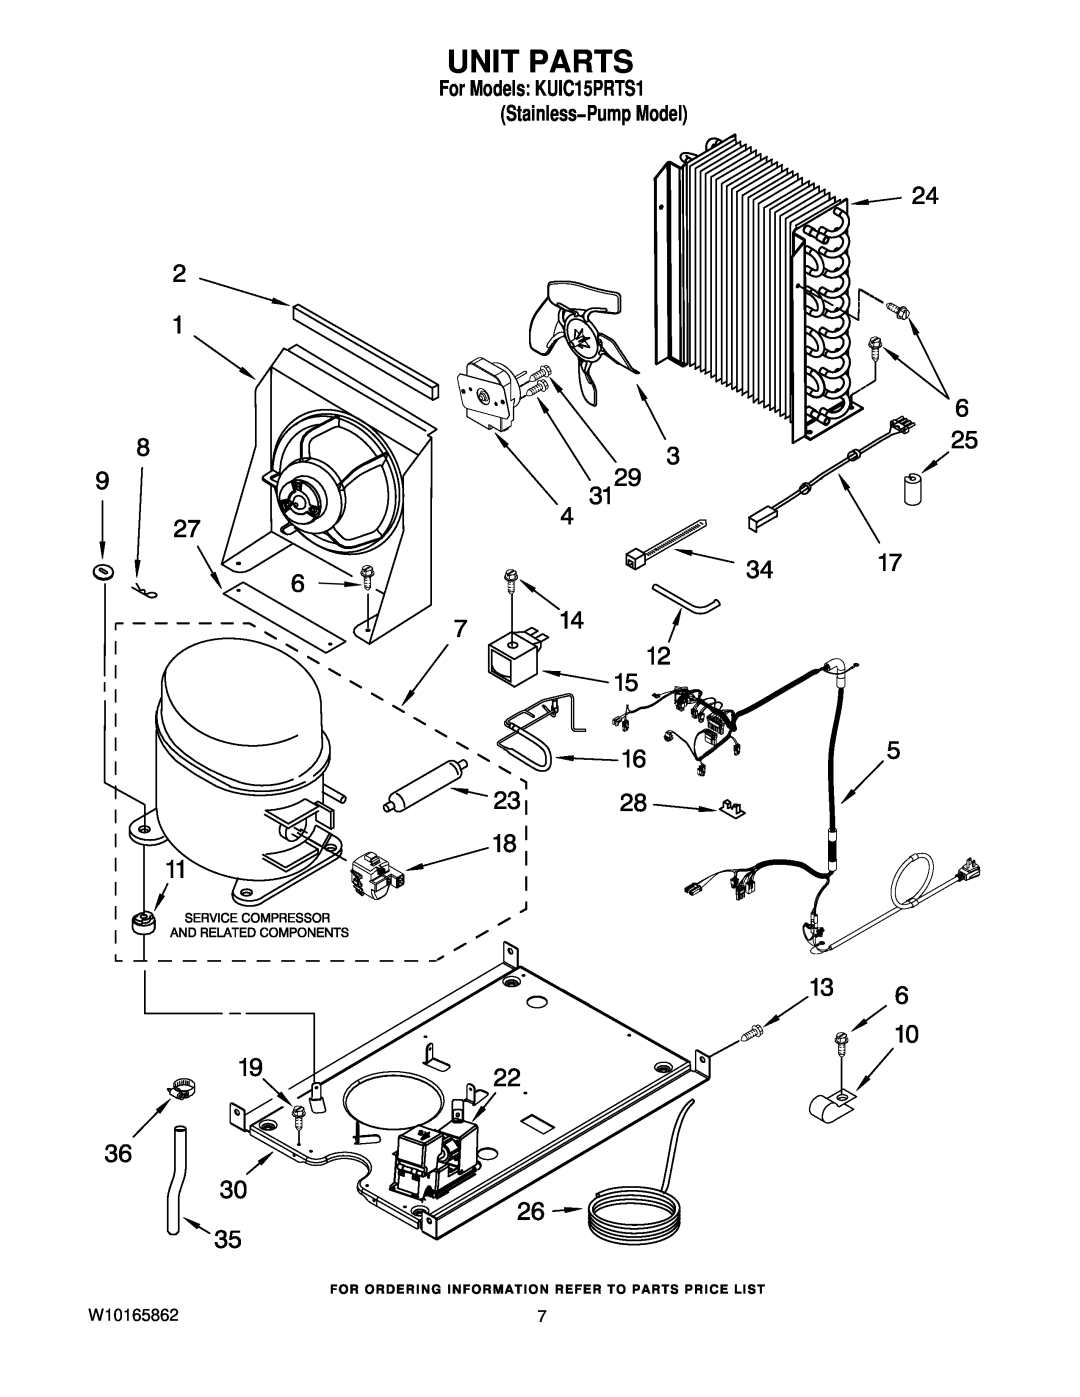 KitchenAid manual Unit Parts, W10165862, For Models KUIC15PRTS1 Stainless−Pump Model 